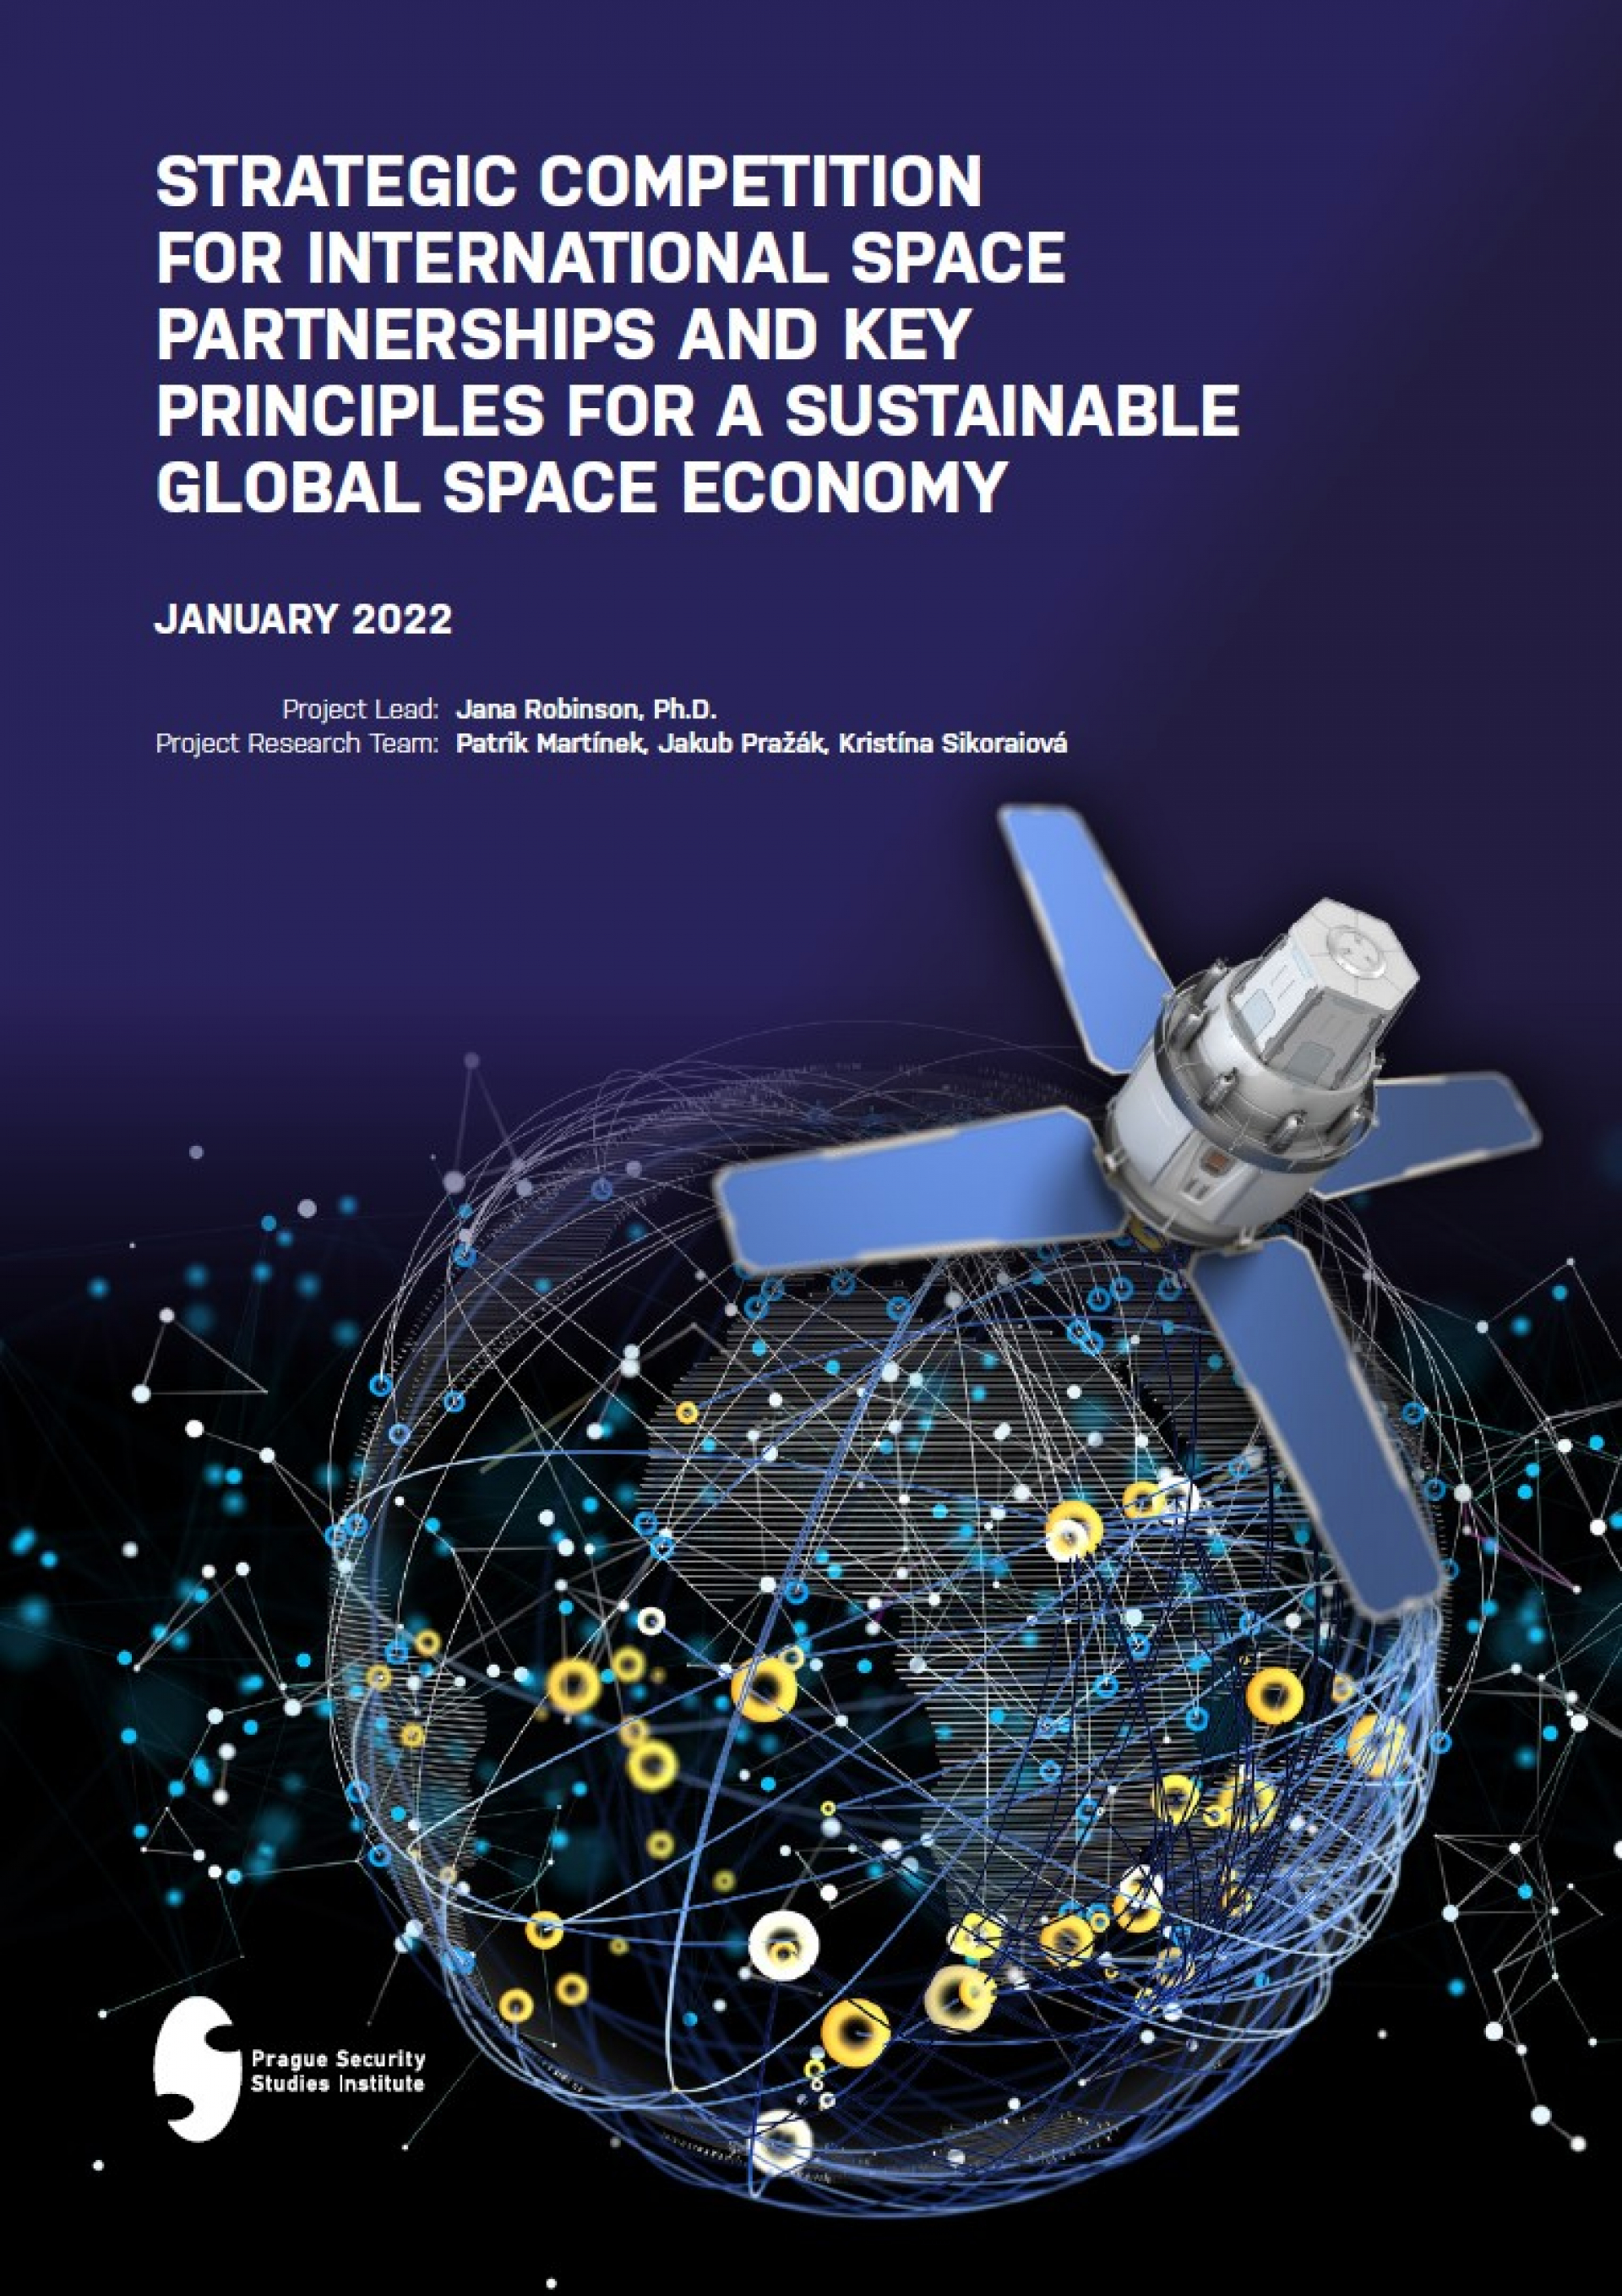 Strategic Competetion for International Space Partnerships and Key Principles for a Sustainable Global Space Economy COVERPAGE